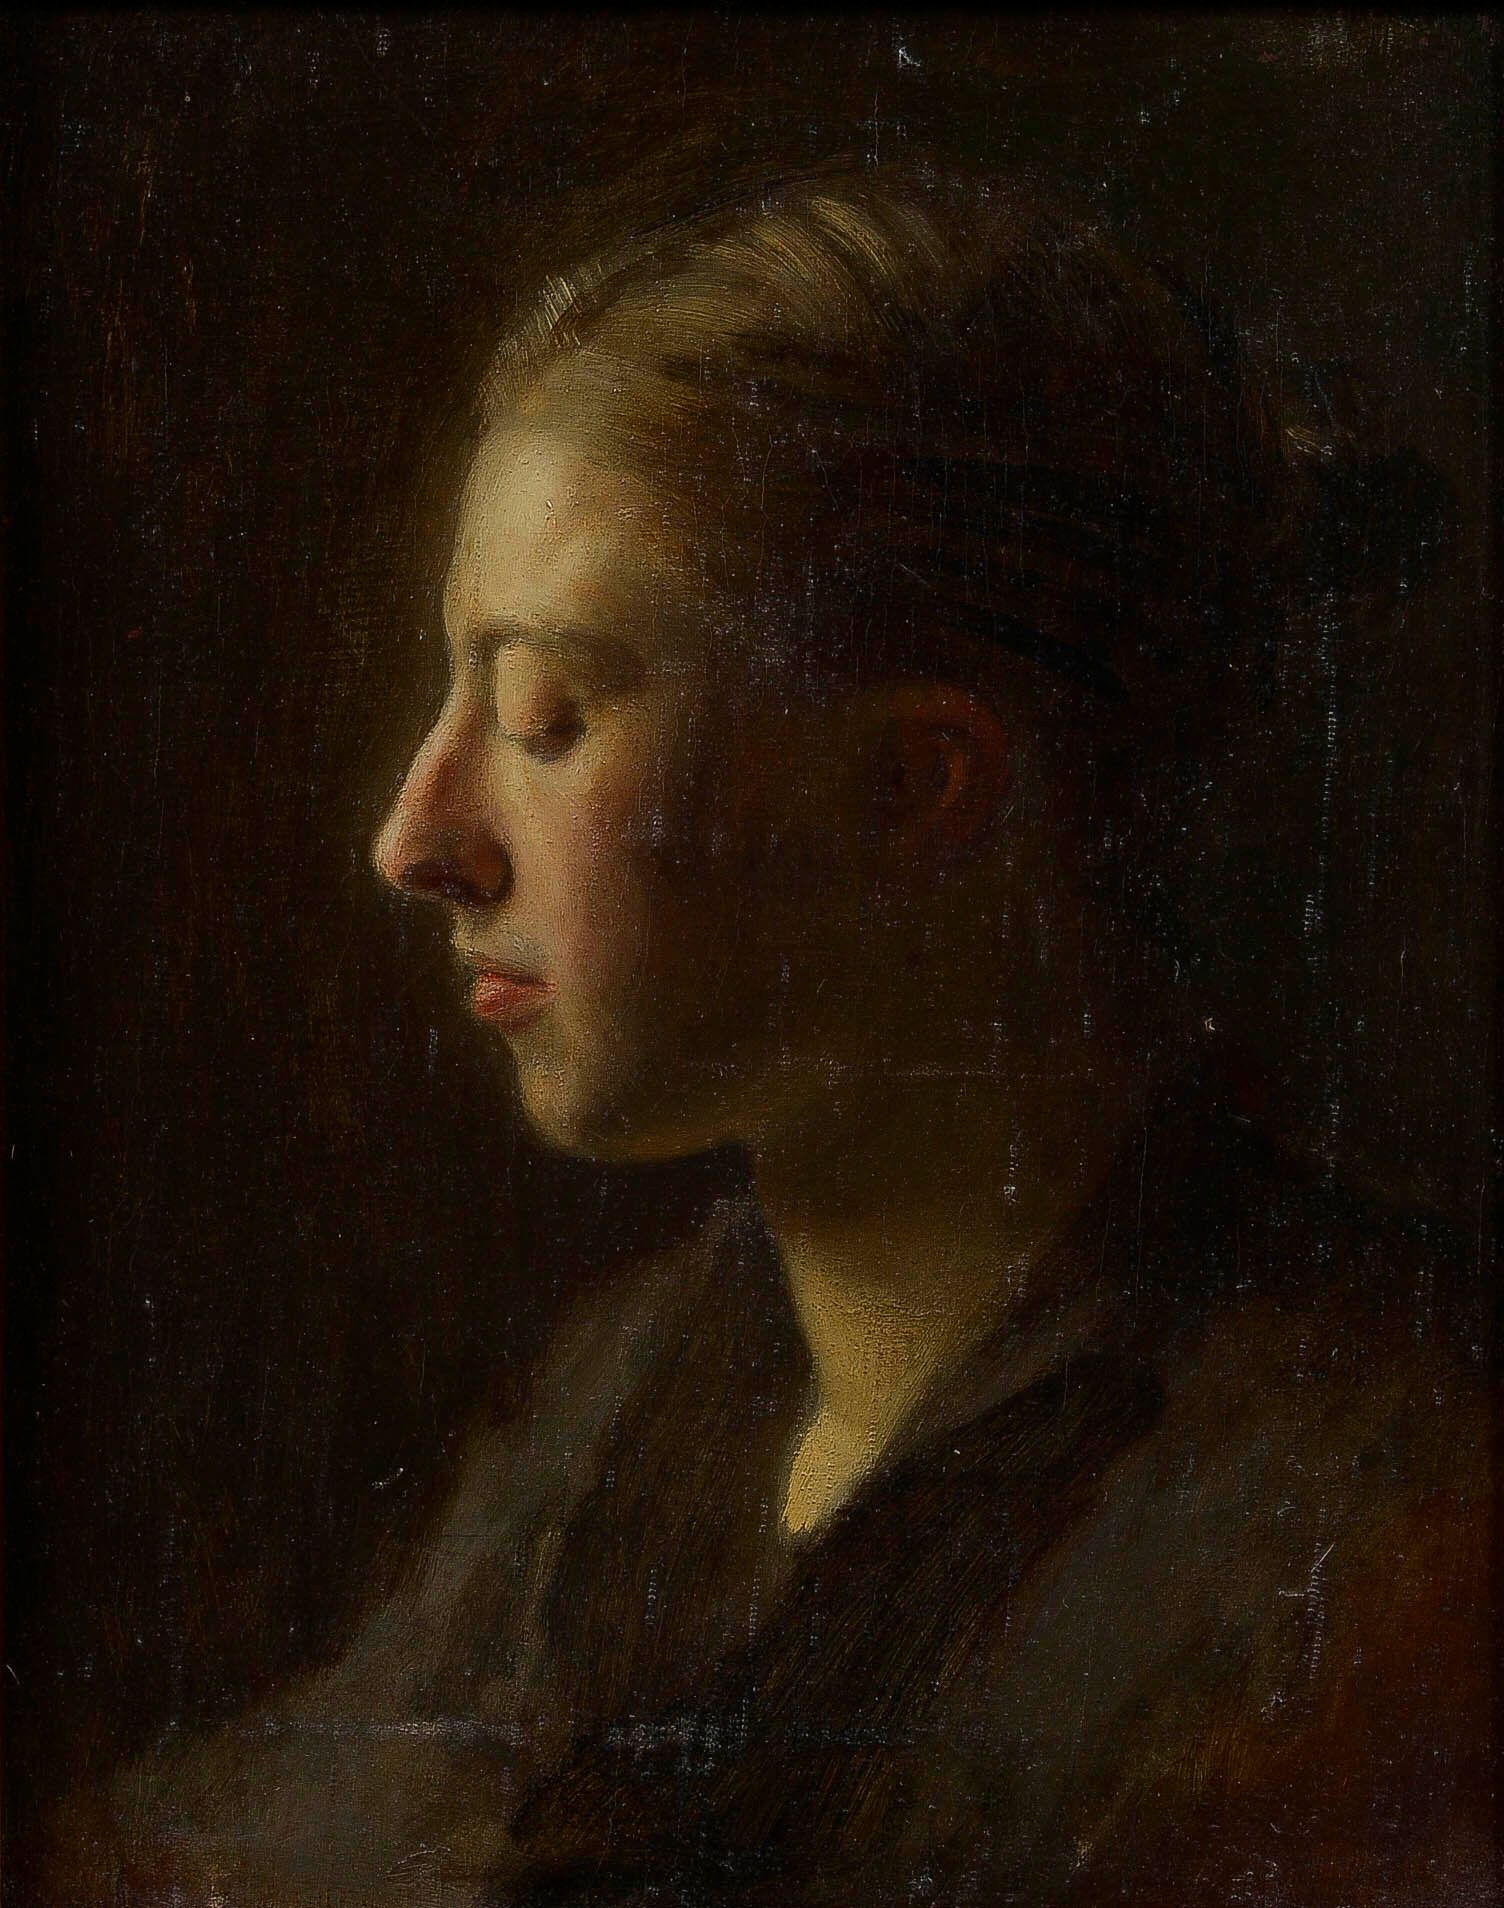 Null Joseph BRUNIER (1860-1929)

Young girl in profile with closed eyes 

Oil on&hellip;